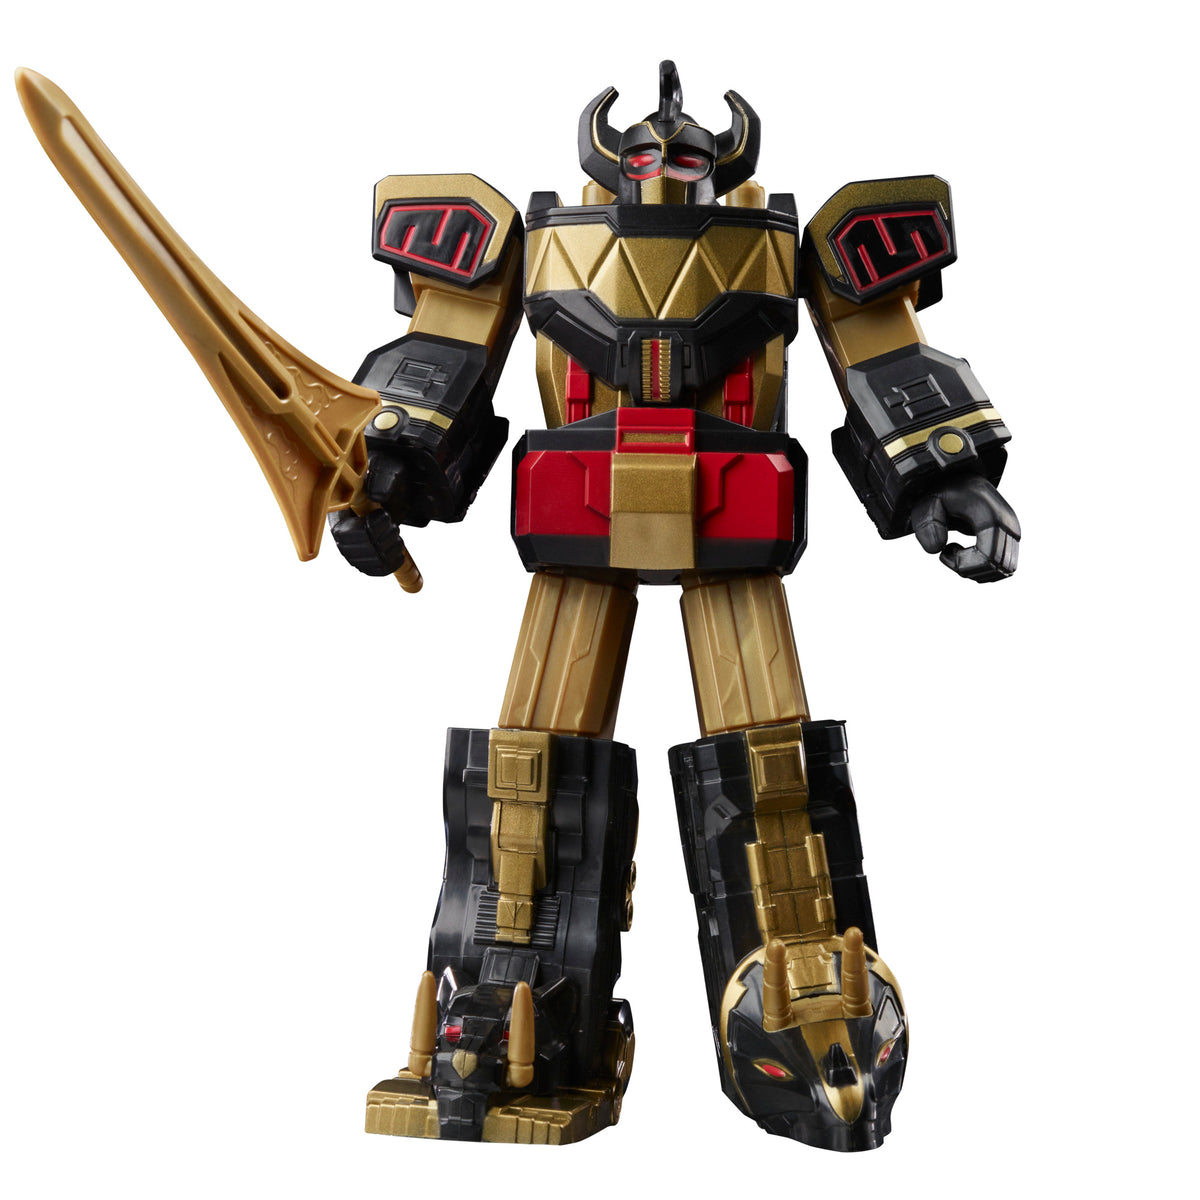 Power Rangers Mighty Morphin Dino Megazord Redesign Released by